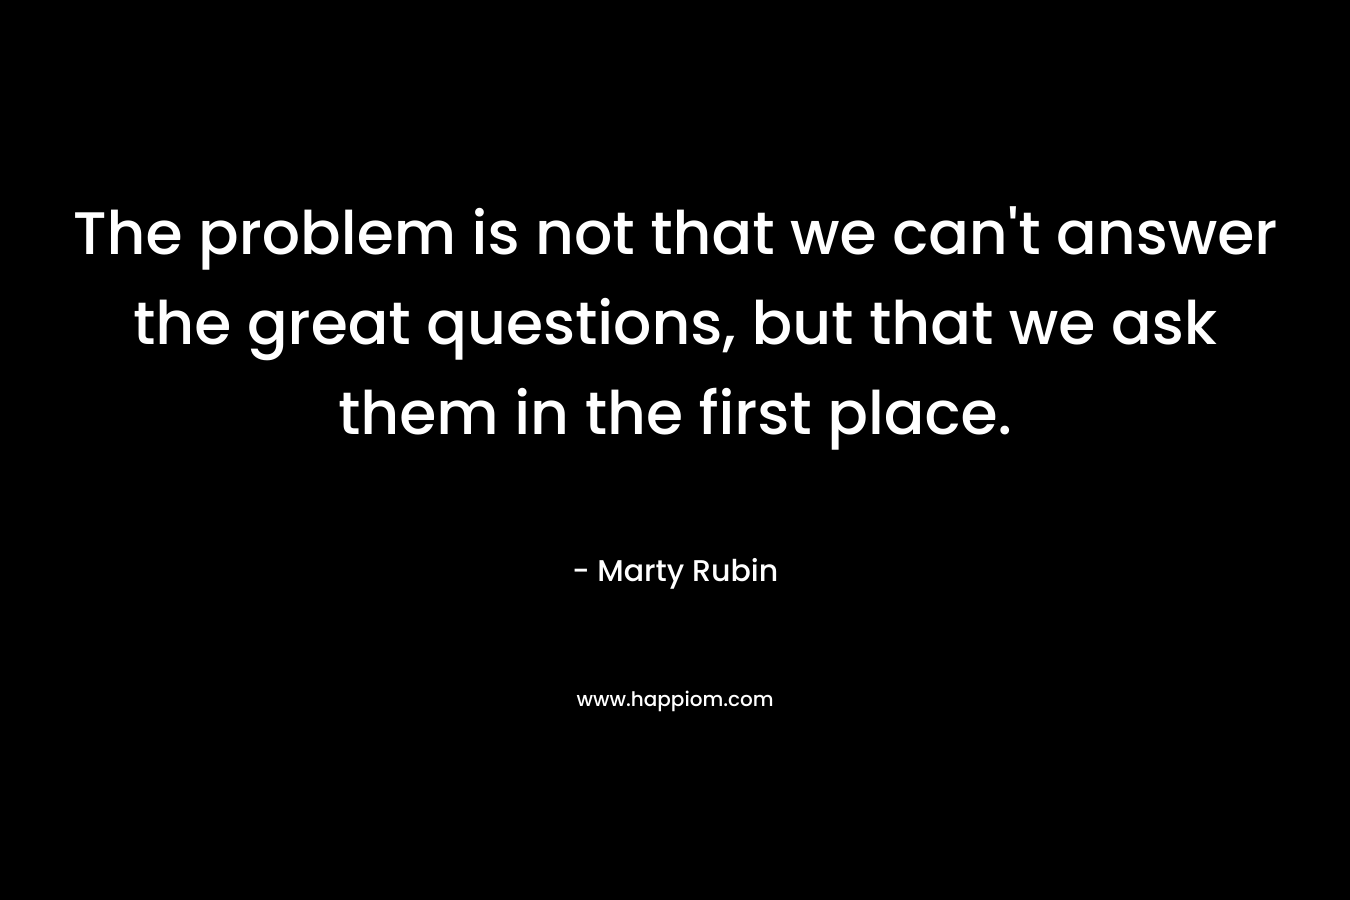 The problem is not that we can't answer the great questions, but that we ask them in the first place.